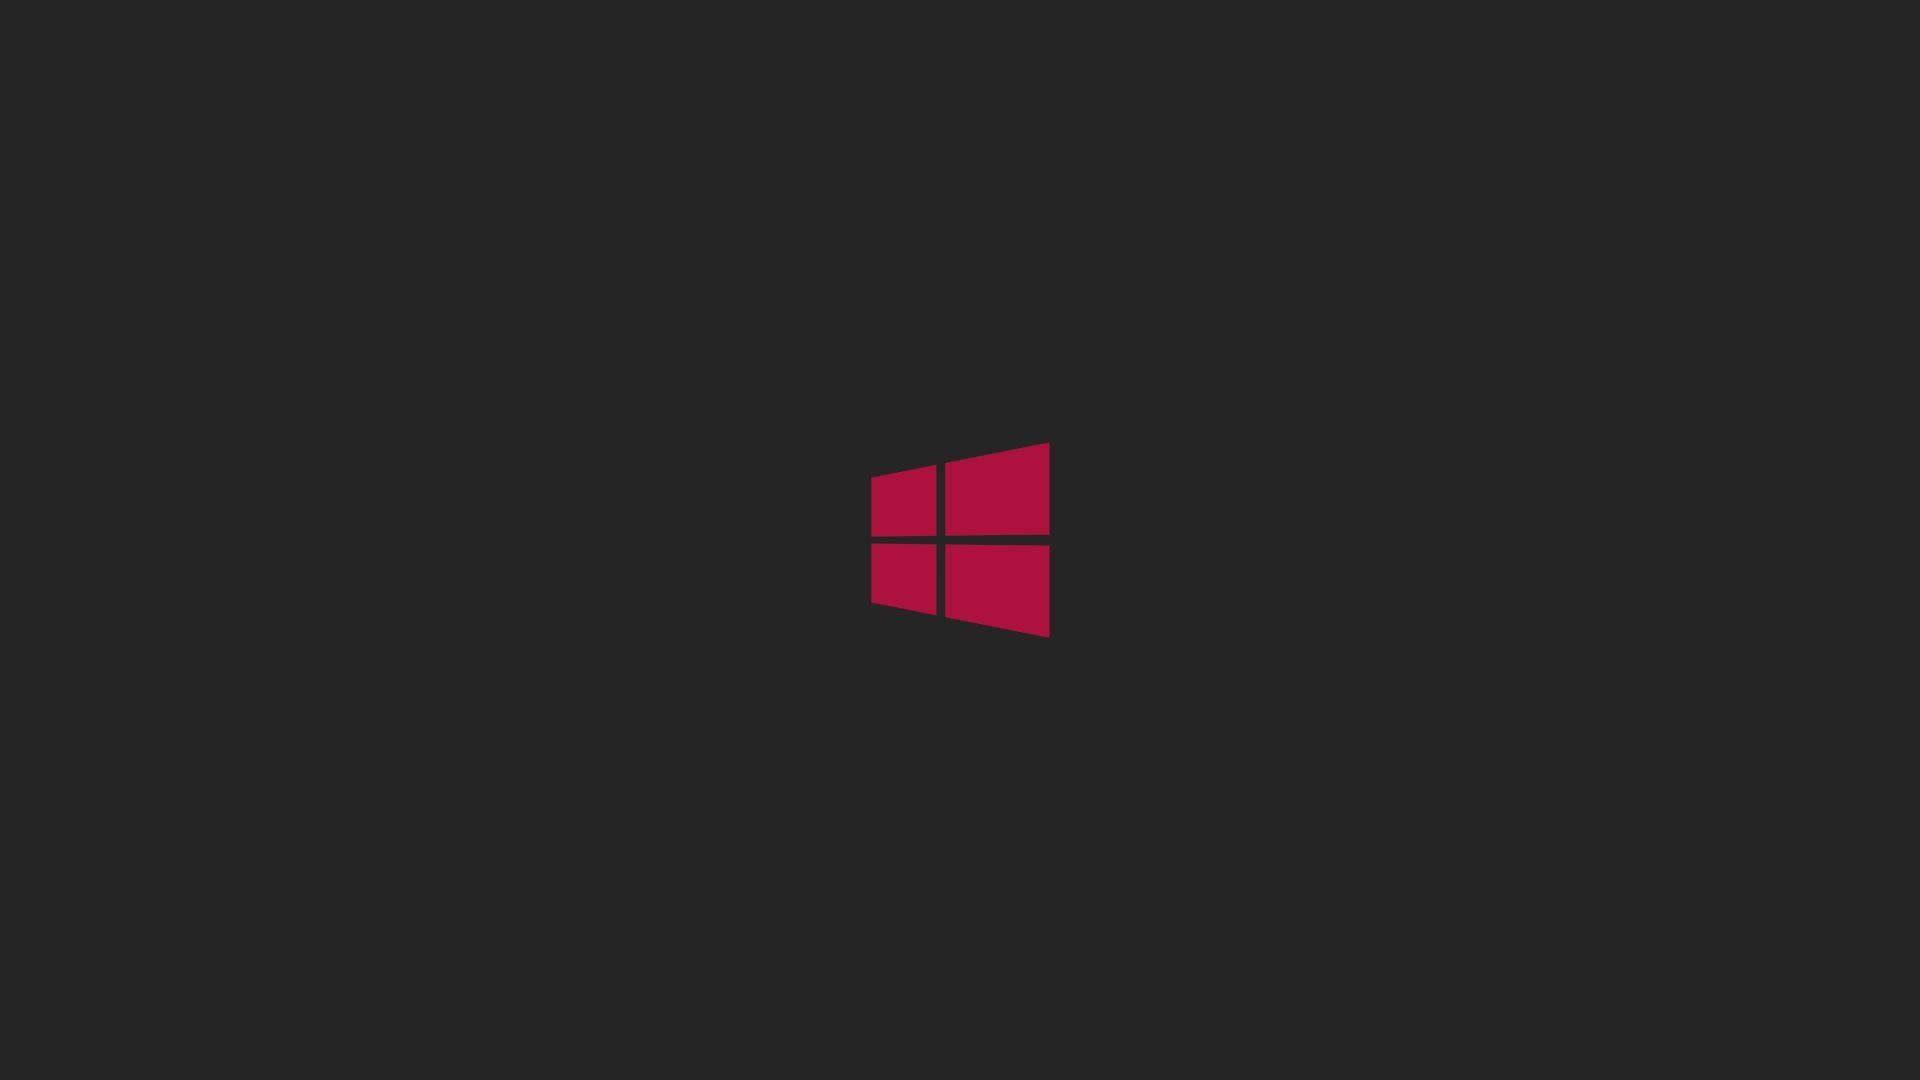 Red Windows Logo - Latest Microsoft Windows Logo Wallpaper In Gray And Red | PaperPull